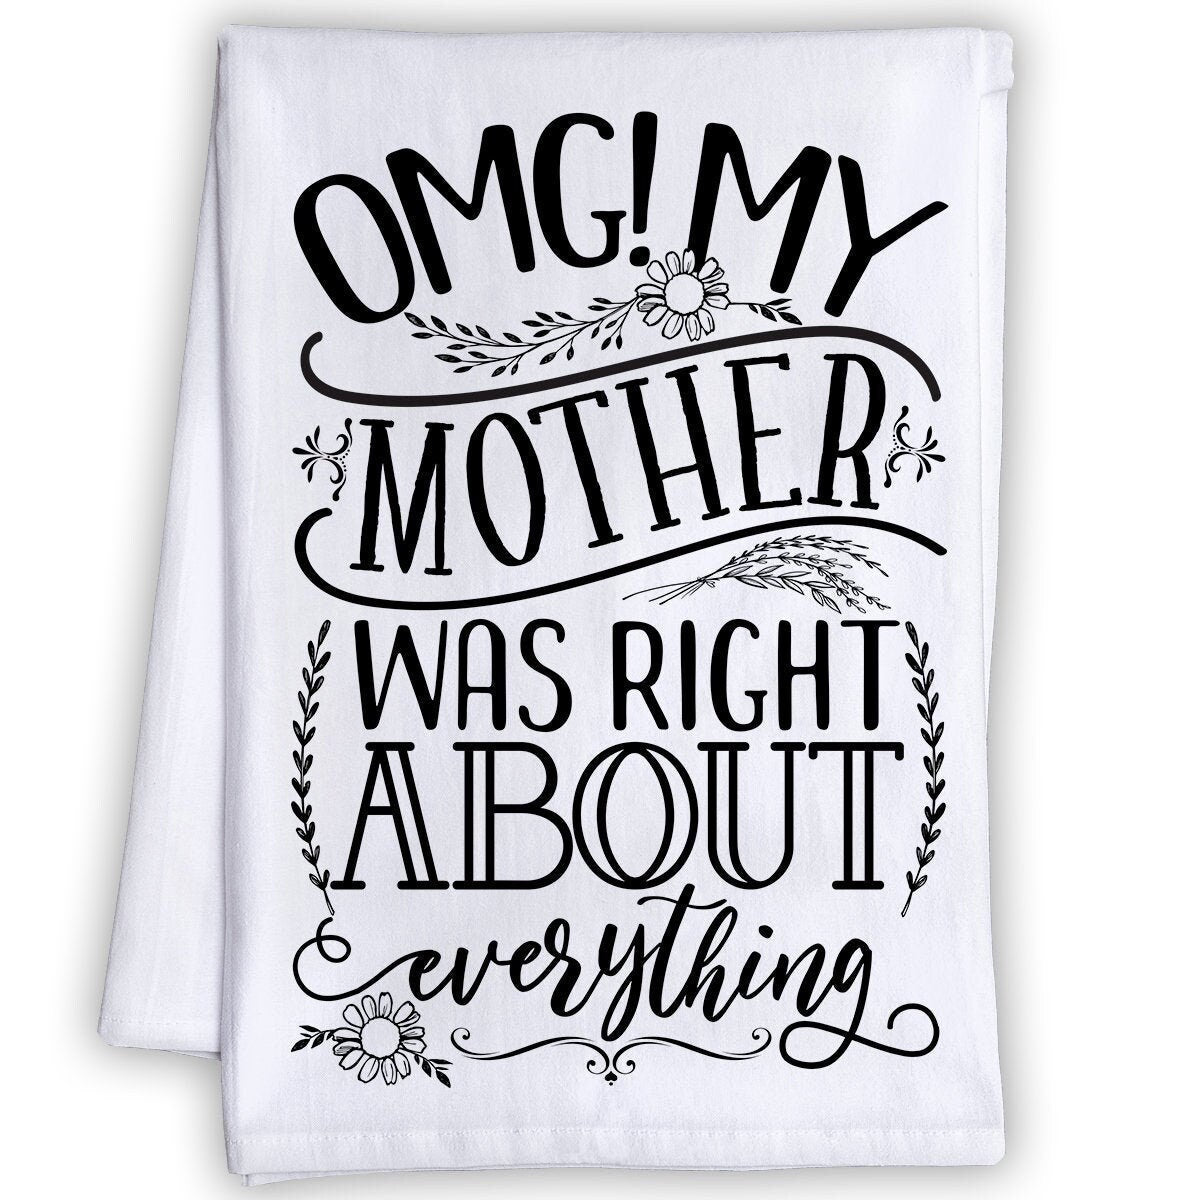 Funny Kitchen Tea Towels - OMG! My Mother Was Right About Everything - Humorous Fun Sayings - Cute Housewarming Gift/Fun Home Decor Lone Star Art 